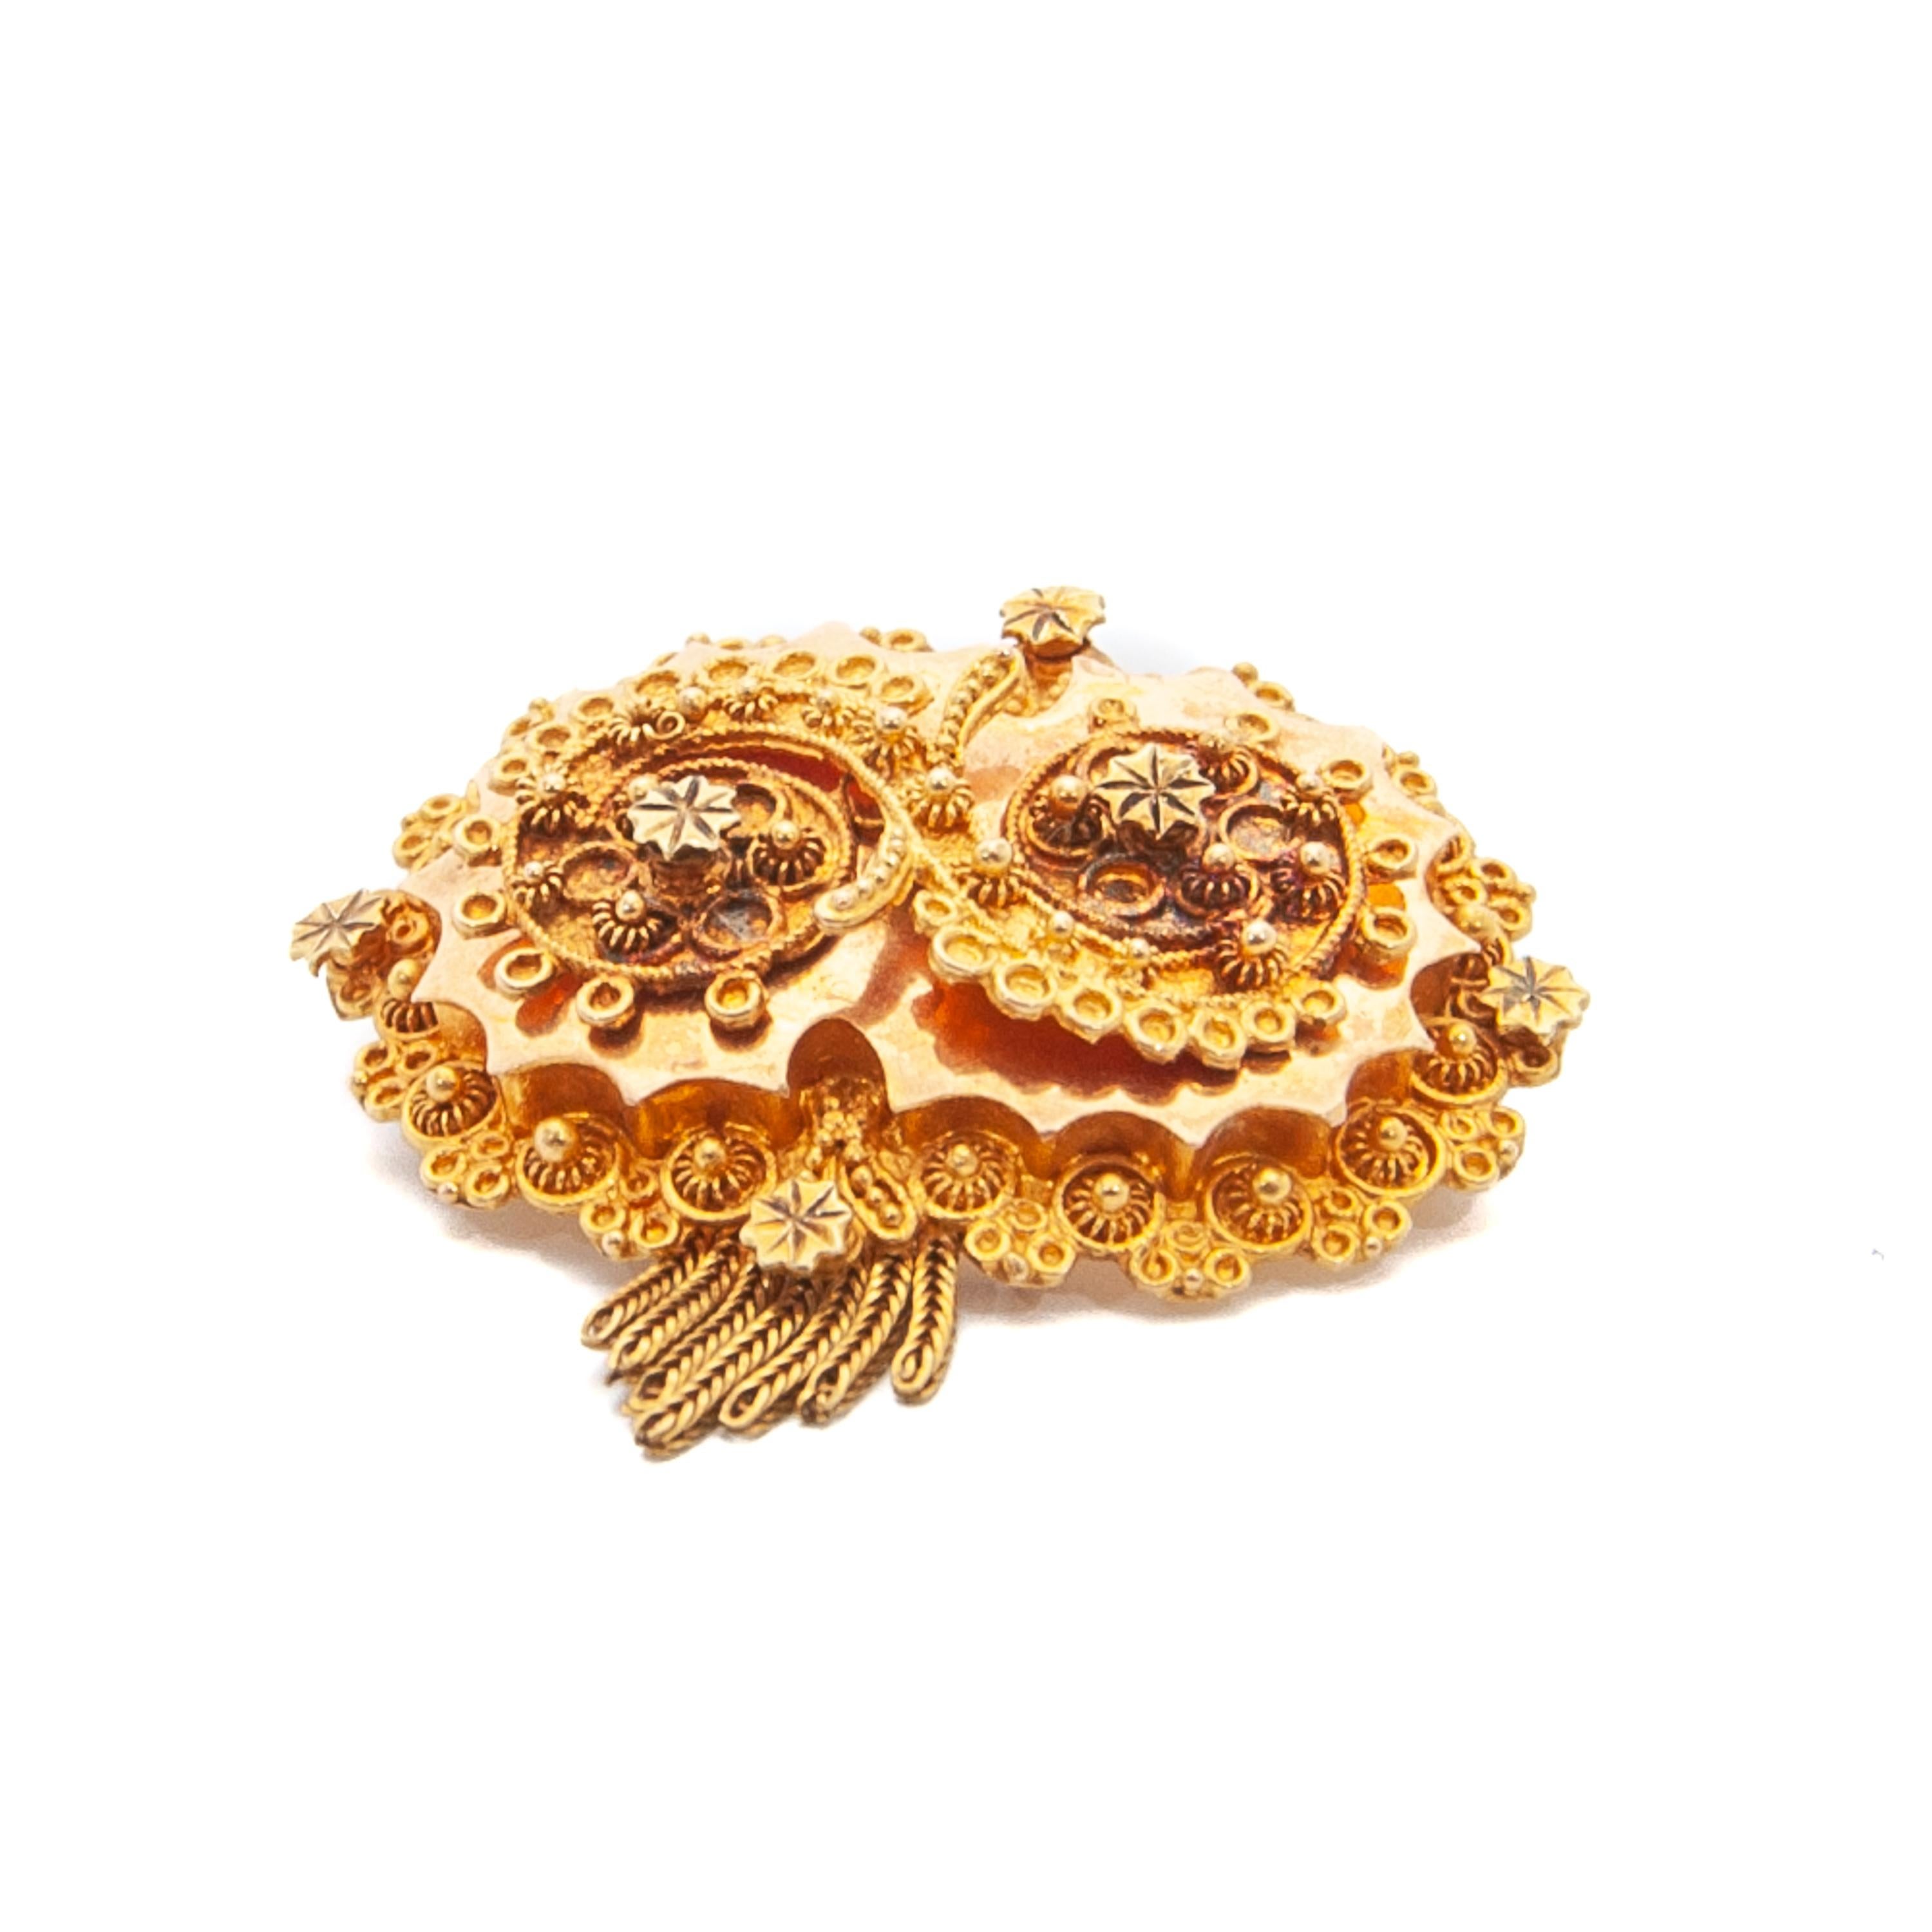 A Victorian 14 karat gold brooch made with cannetille. This ornate brooch has a fine cannetille design with rolled or stamped gold with a raised center piece. The brooch is embellished  with seven gold tassels below the top, this is also called a